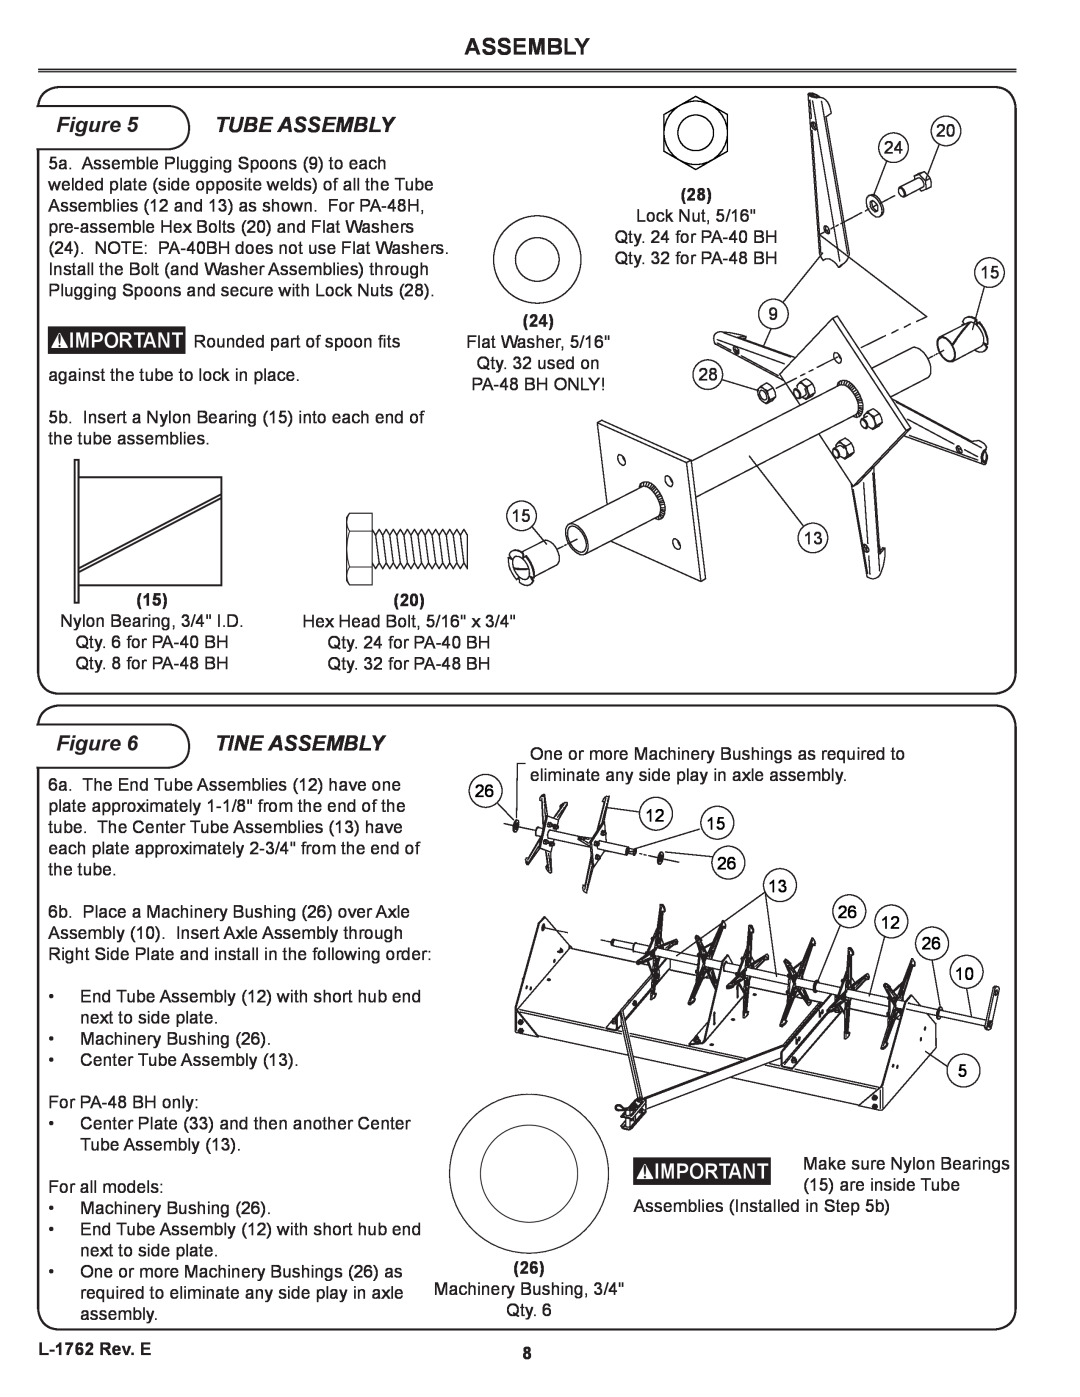 Brinly-Hardy PA-48 BH, PA-40 BH owner manual Tube Assembly, Figure, Tine Assembly, 10 5 